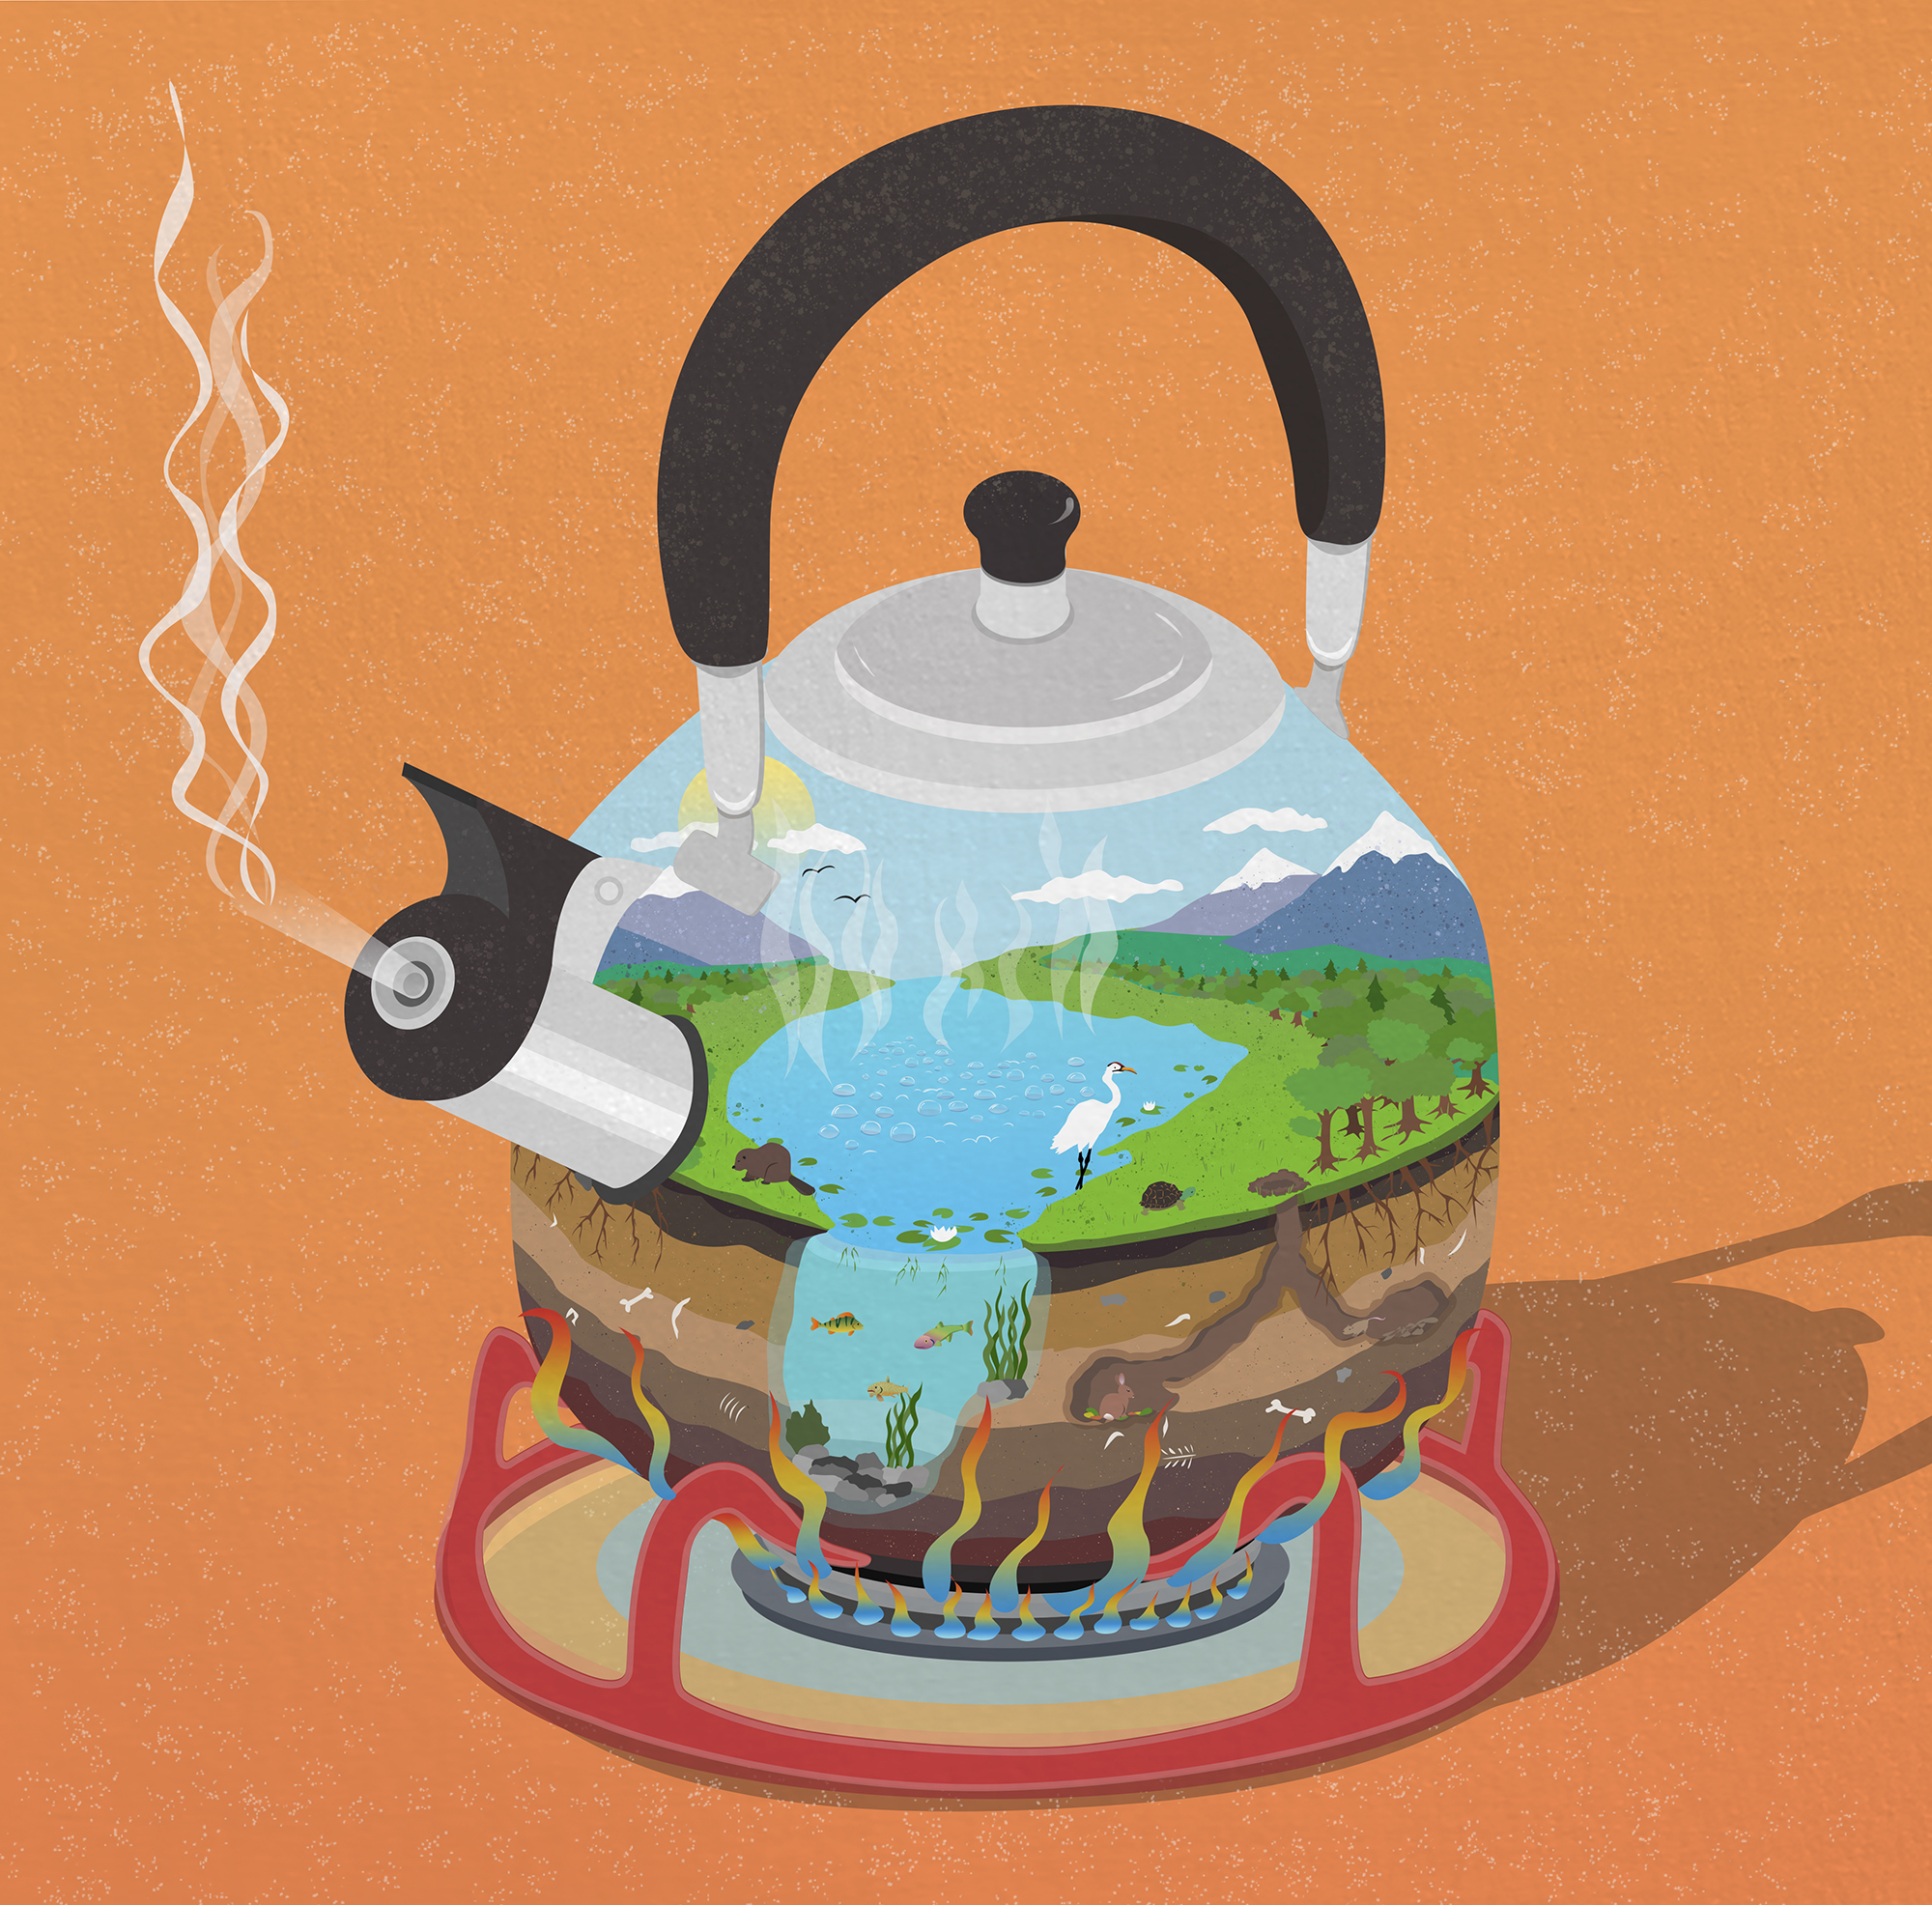 Stove And Kettle As Global Warming